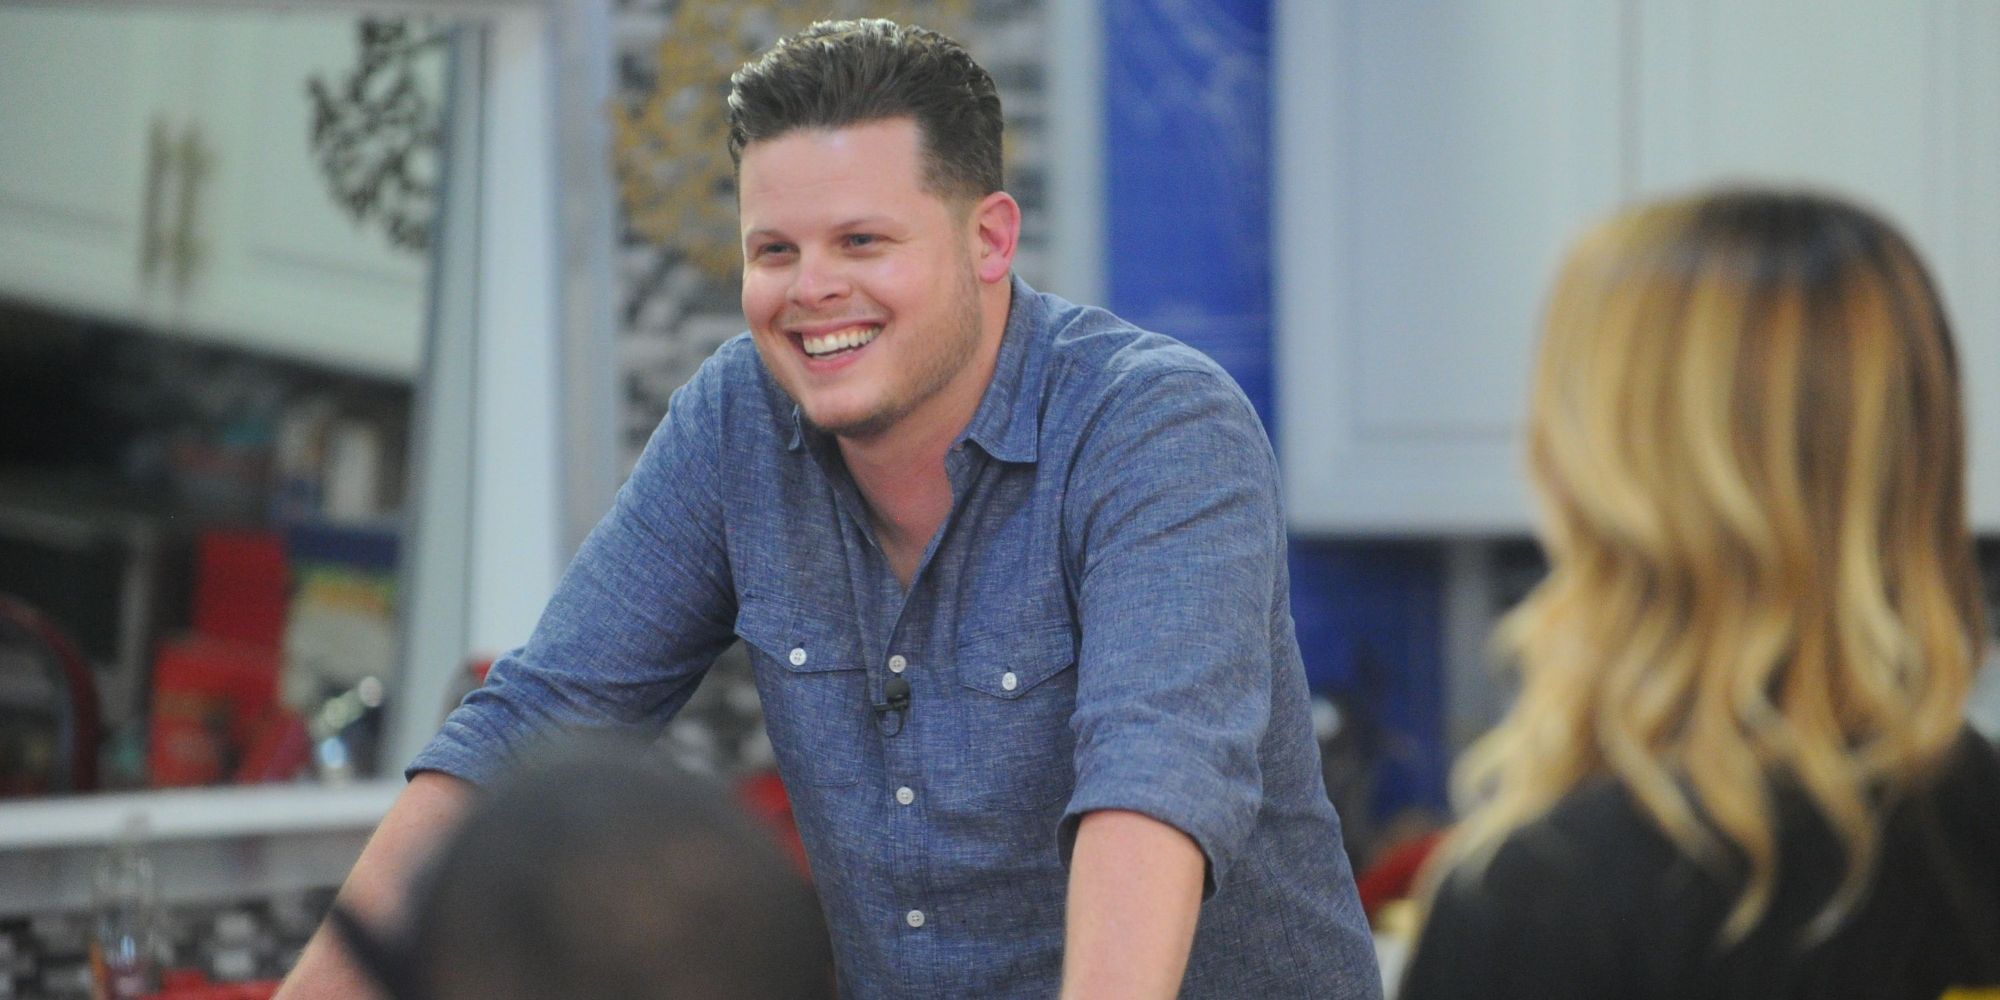 Derrick Levasseur on Big Brother leaning over a counter, smiling.